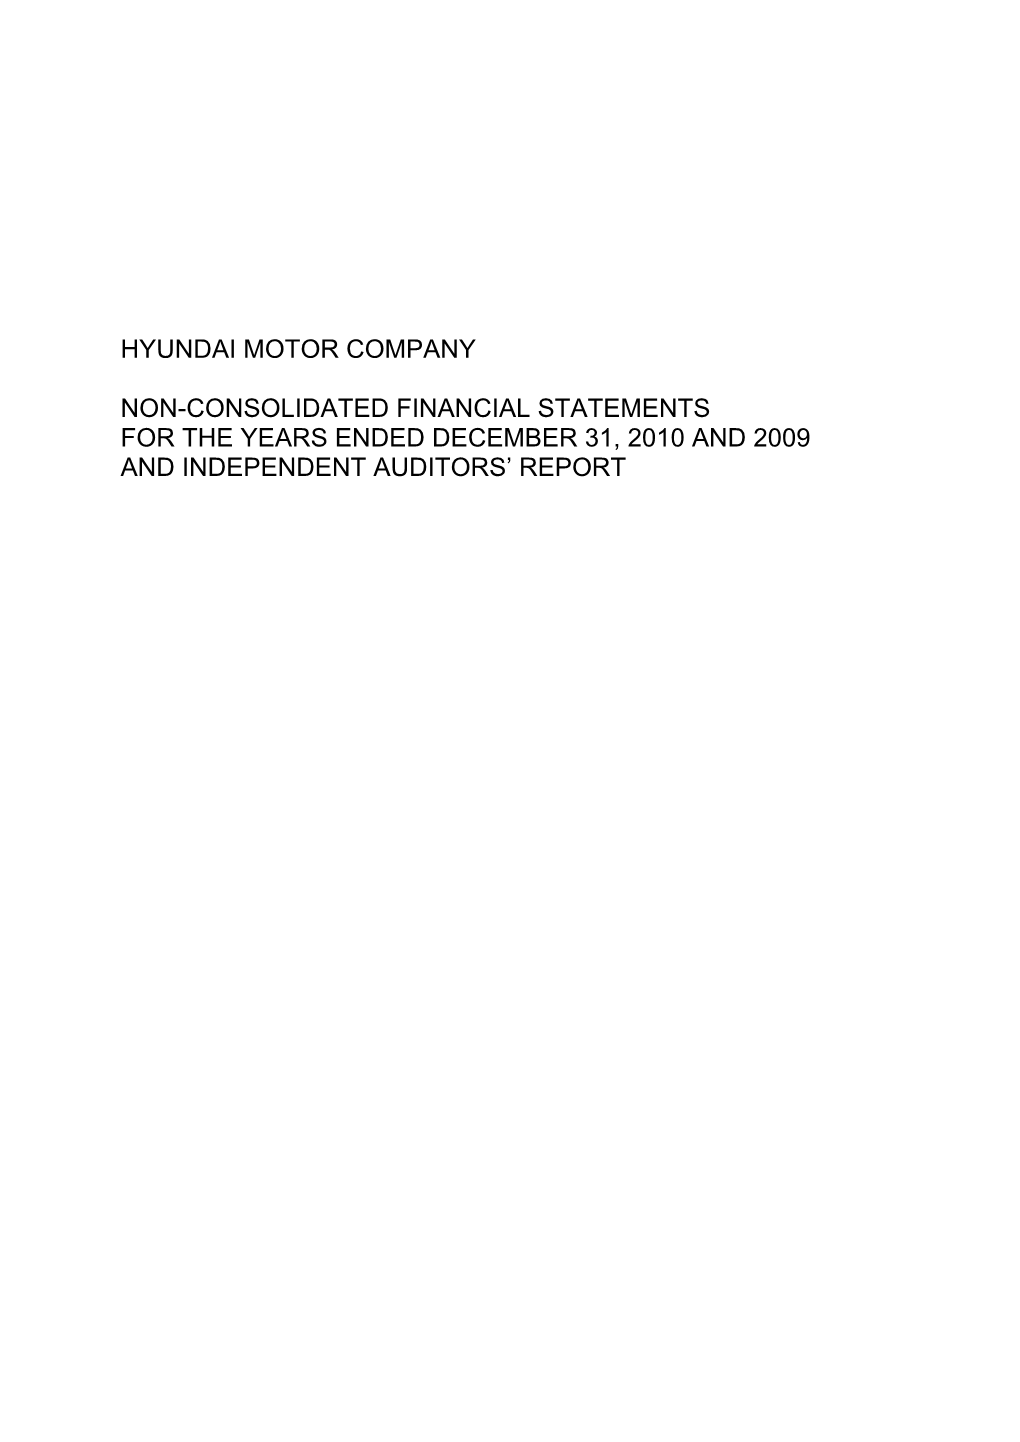 Hyundai Motor Company Non-Consolidated Financial Statements for the Years Ended December 31, 2010 and 2009 and Independent Audit